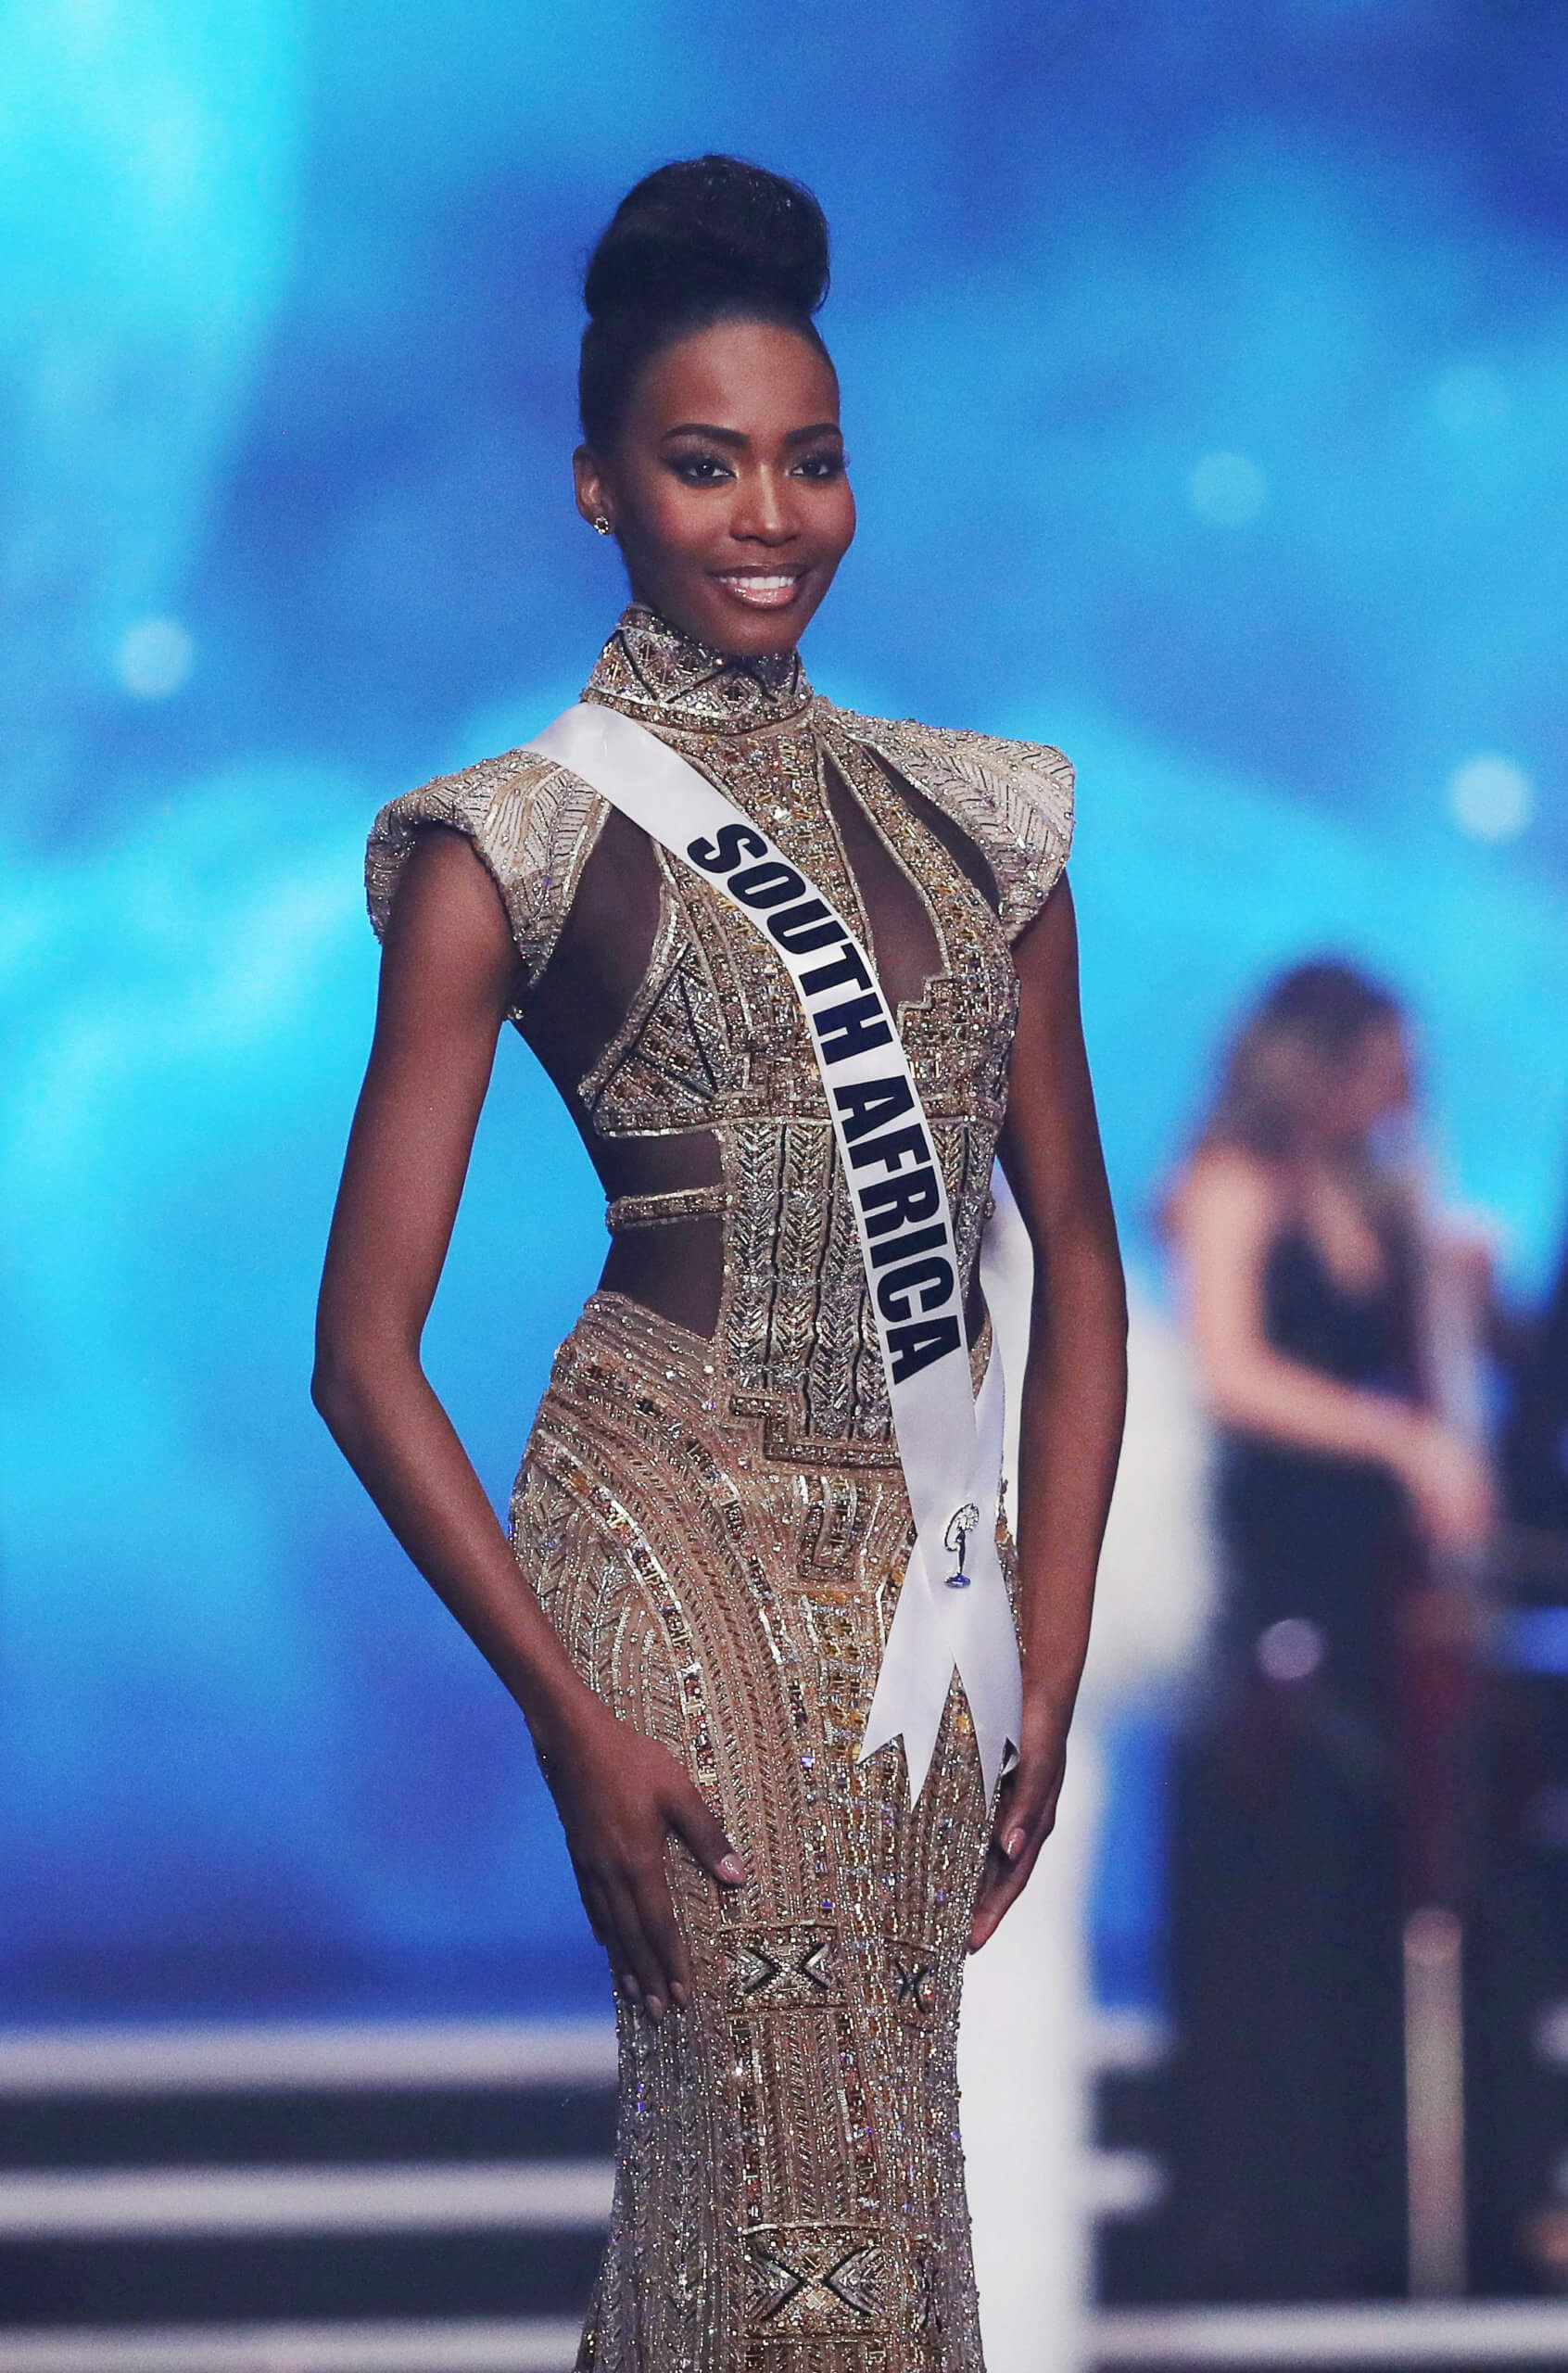 Miss South Africa cops third runnerup at 70th Miss Universe Pageant